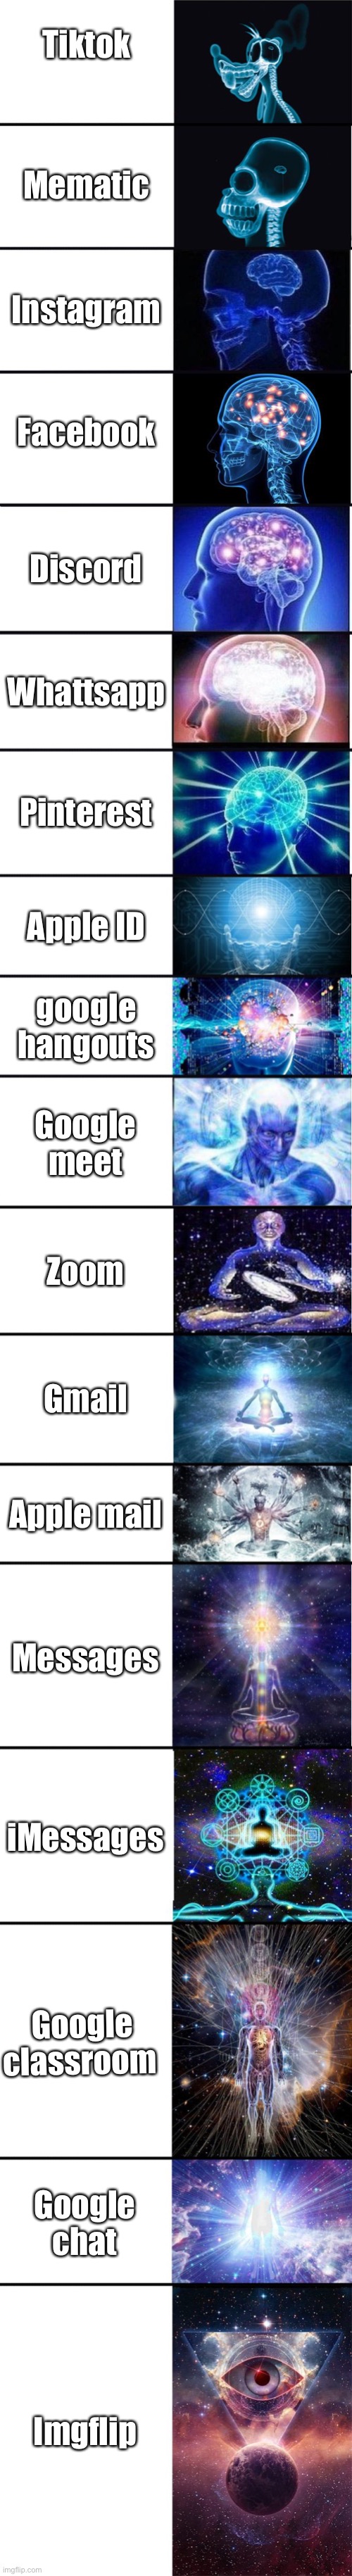 :D | Tiktok; Mematic; Instagram; Facebook; Discord; Whattsapp; Pinterest; Apple ID; google hangouts; Google meet; Zoom; Gmail; Apple mail; Messages; iMessages; Google classroom; Google chat; Imgflip | image tagged in expanding brain 9001 | made w/ Imgflip meme maker